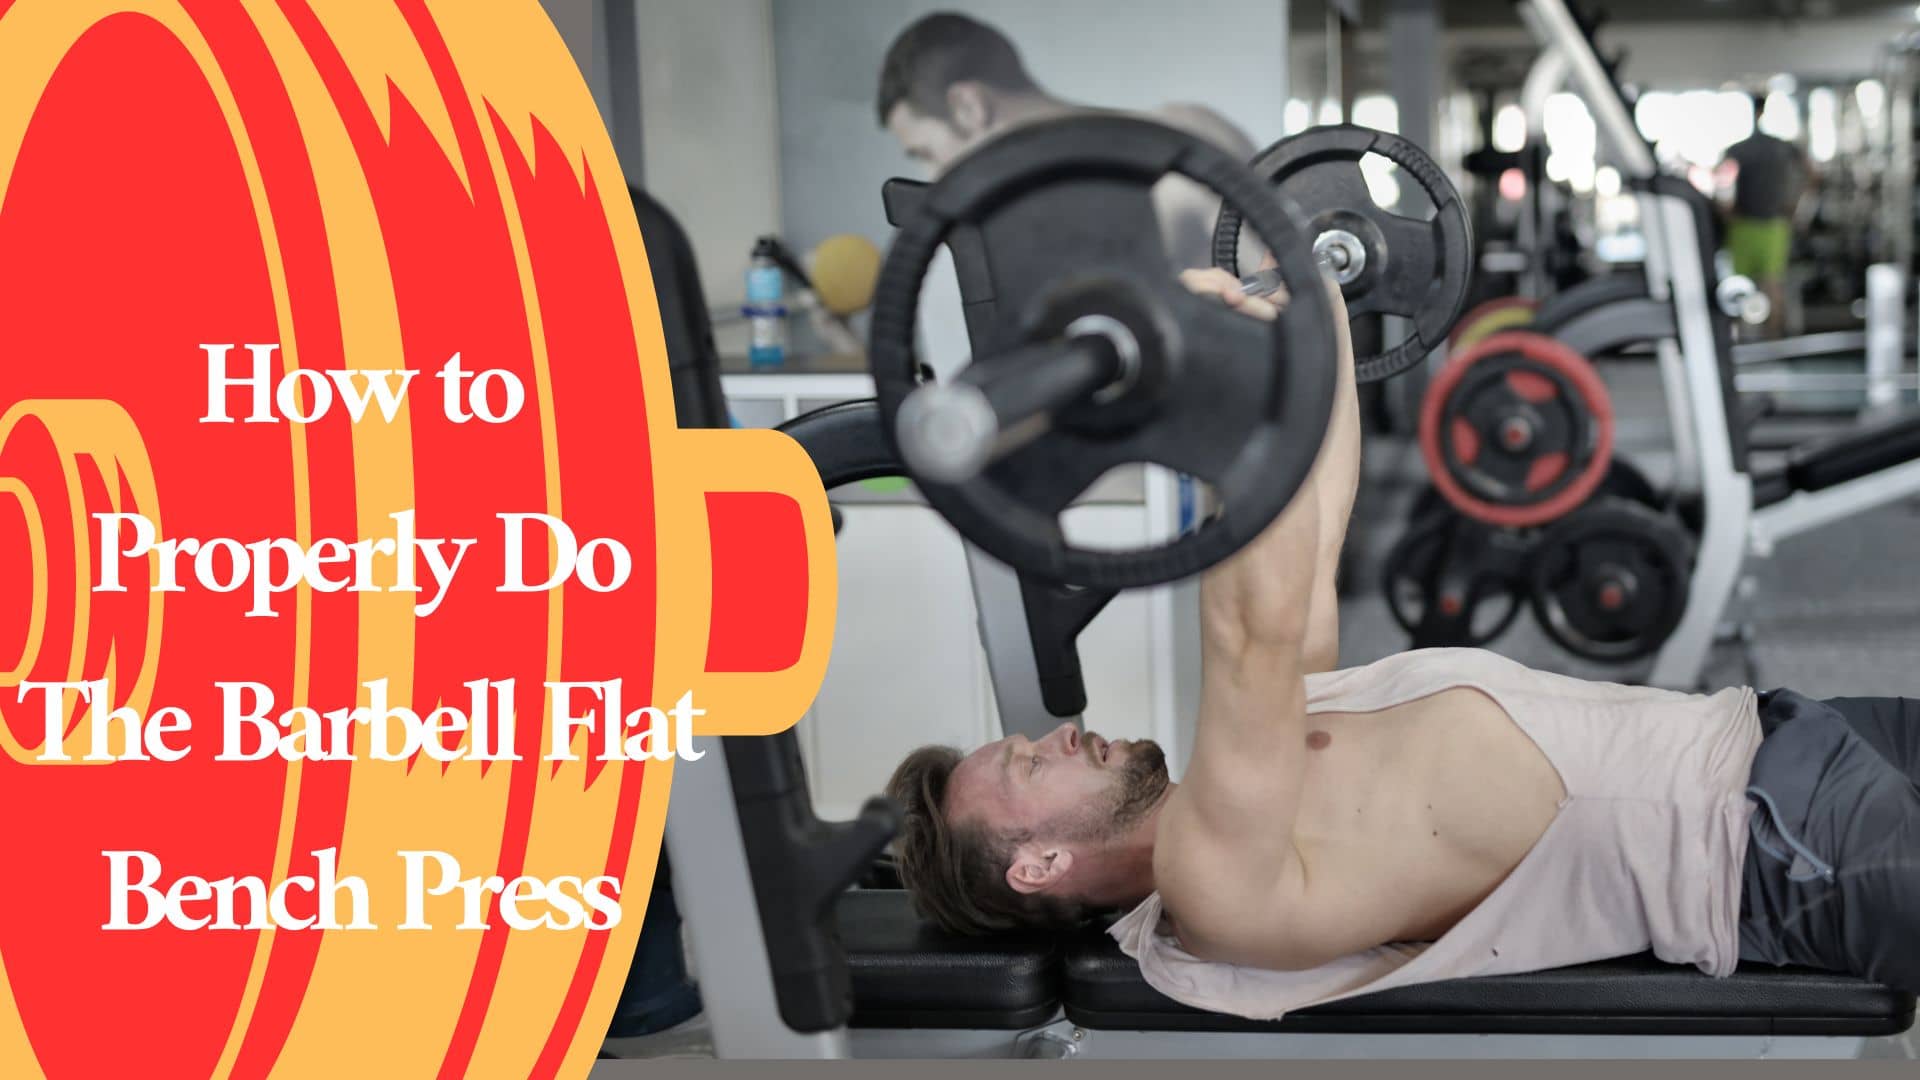 How to Properly Do The Barbell Flat Bench Press